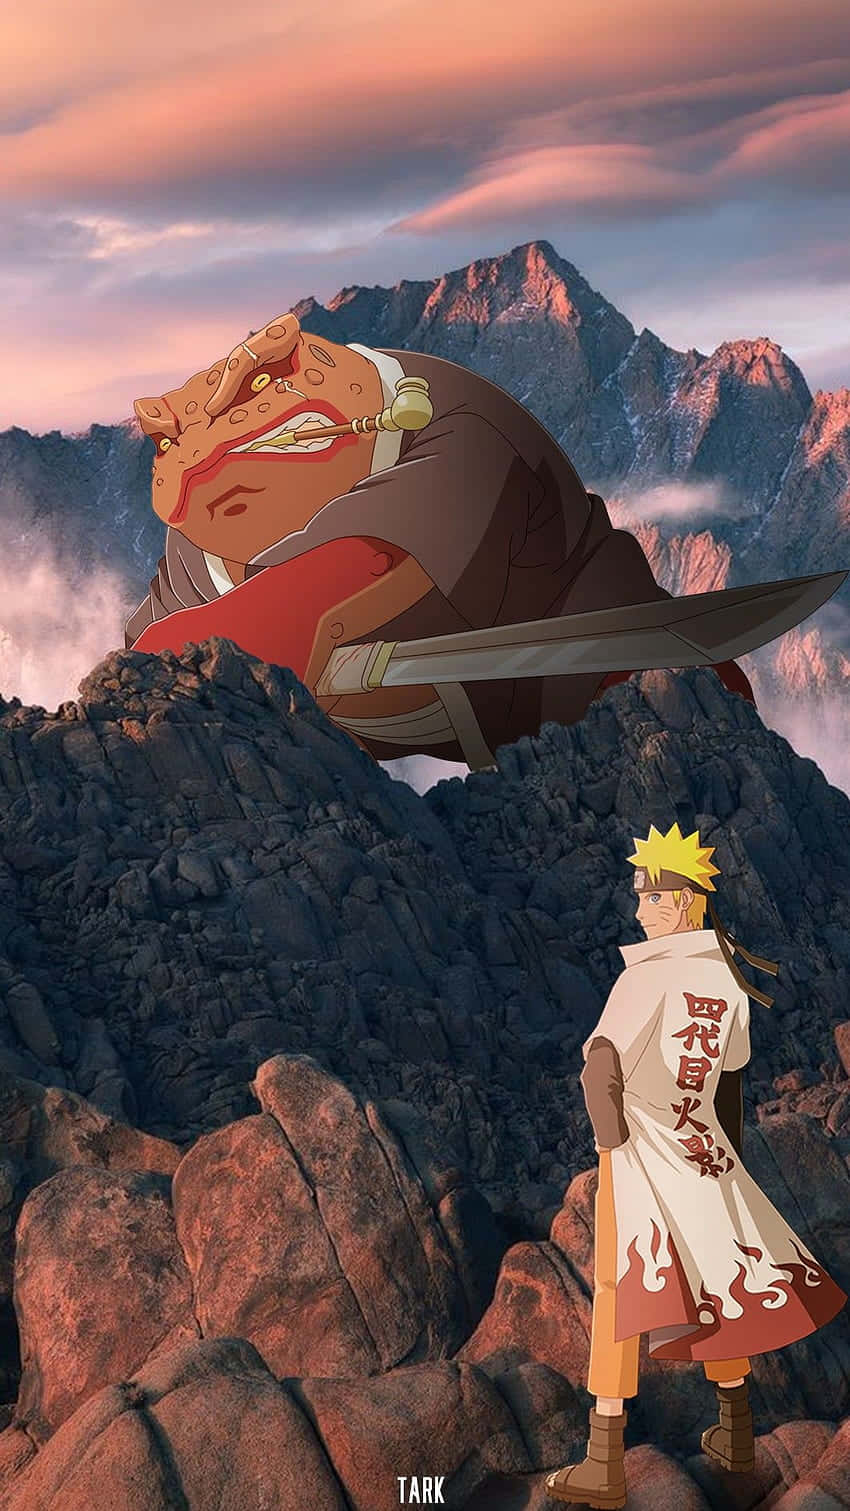 Get your hands on the latest Naruto Shippuden Phone Wallpaper